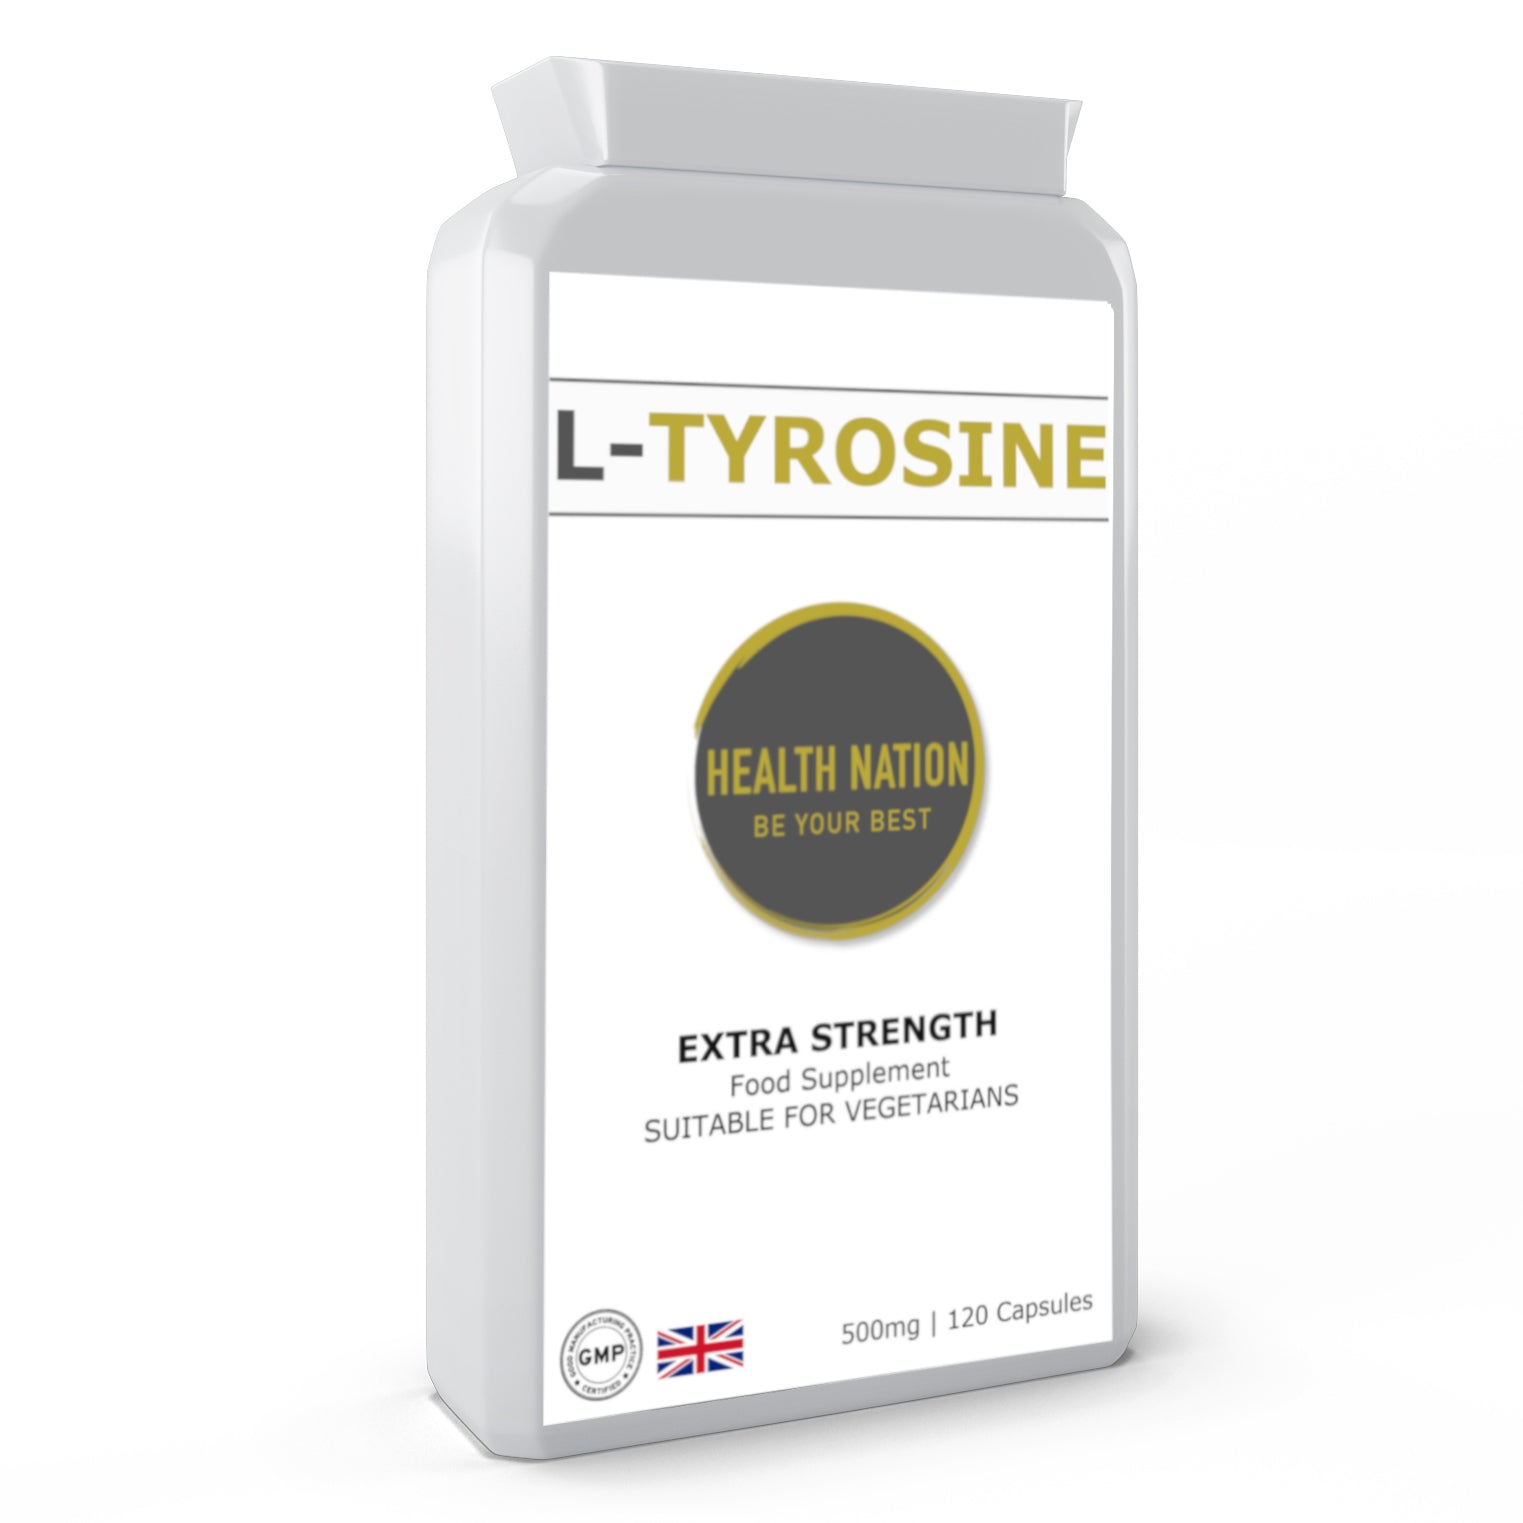 L-Tyrosine | Helps with Mood, Stress, Mental Clarity and Performance| Made in UK | 500mg 120 Capsules - Health Nation